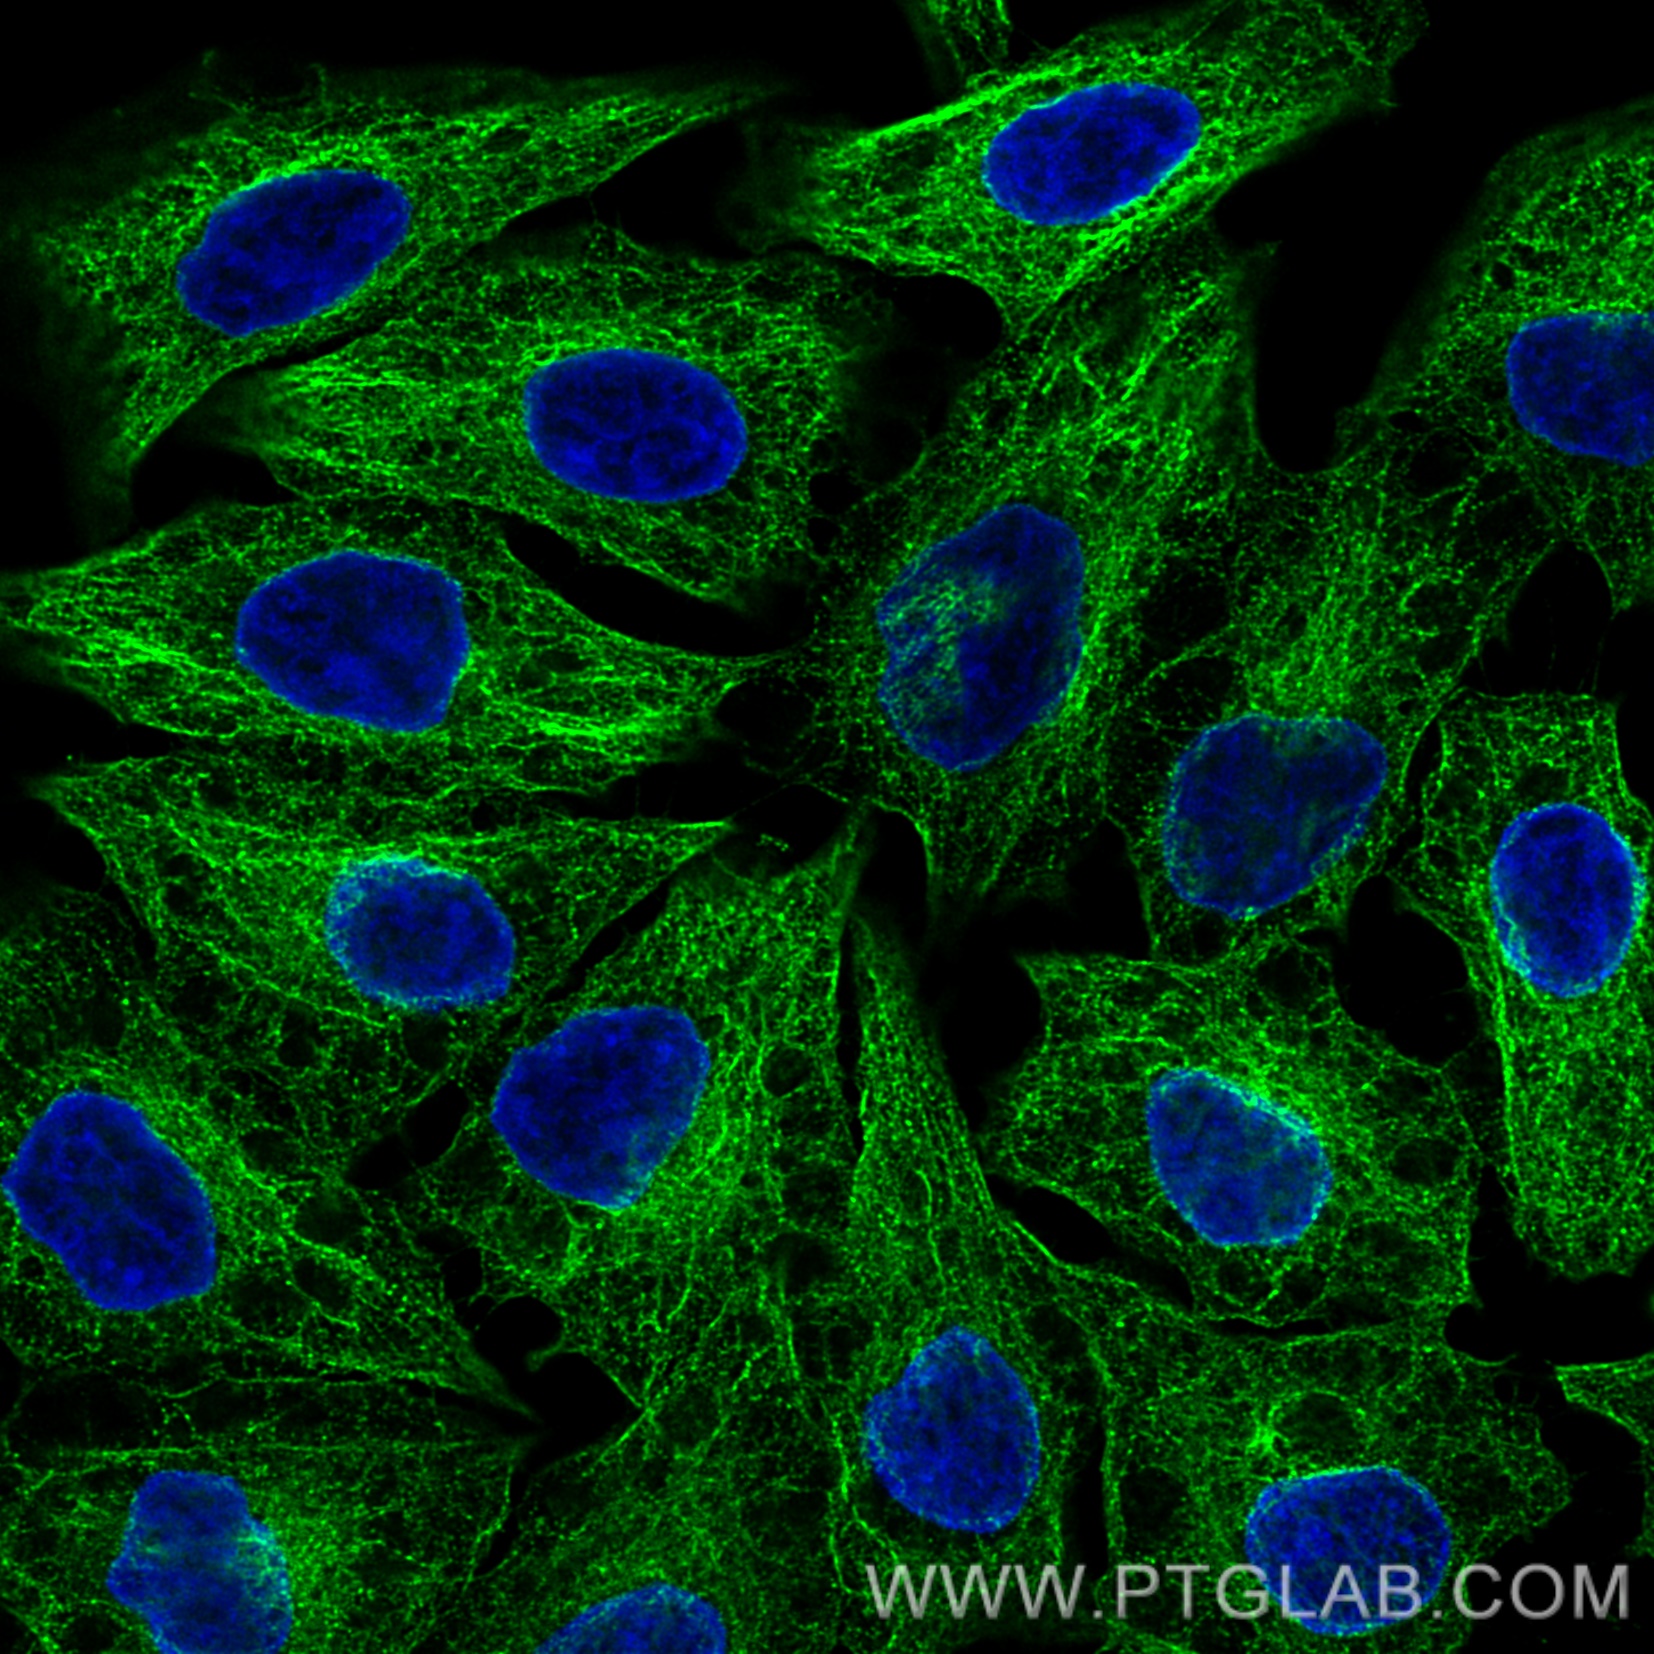 Immunofluorescence of HeLa: PFA-fixed HeLa cells were stained with anti-Tubulin antibody labeled with FlexAble CoraLite® Plus 488 Kit (KFA061, green). Nuclei were stained with DAPI (blue). Confocal images were acquired with a 100x oil objective and post-processed. Images were recorded at the Core Facility Bioimaging at the Biomedical Center, LMU Munich.